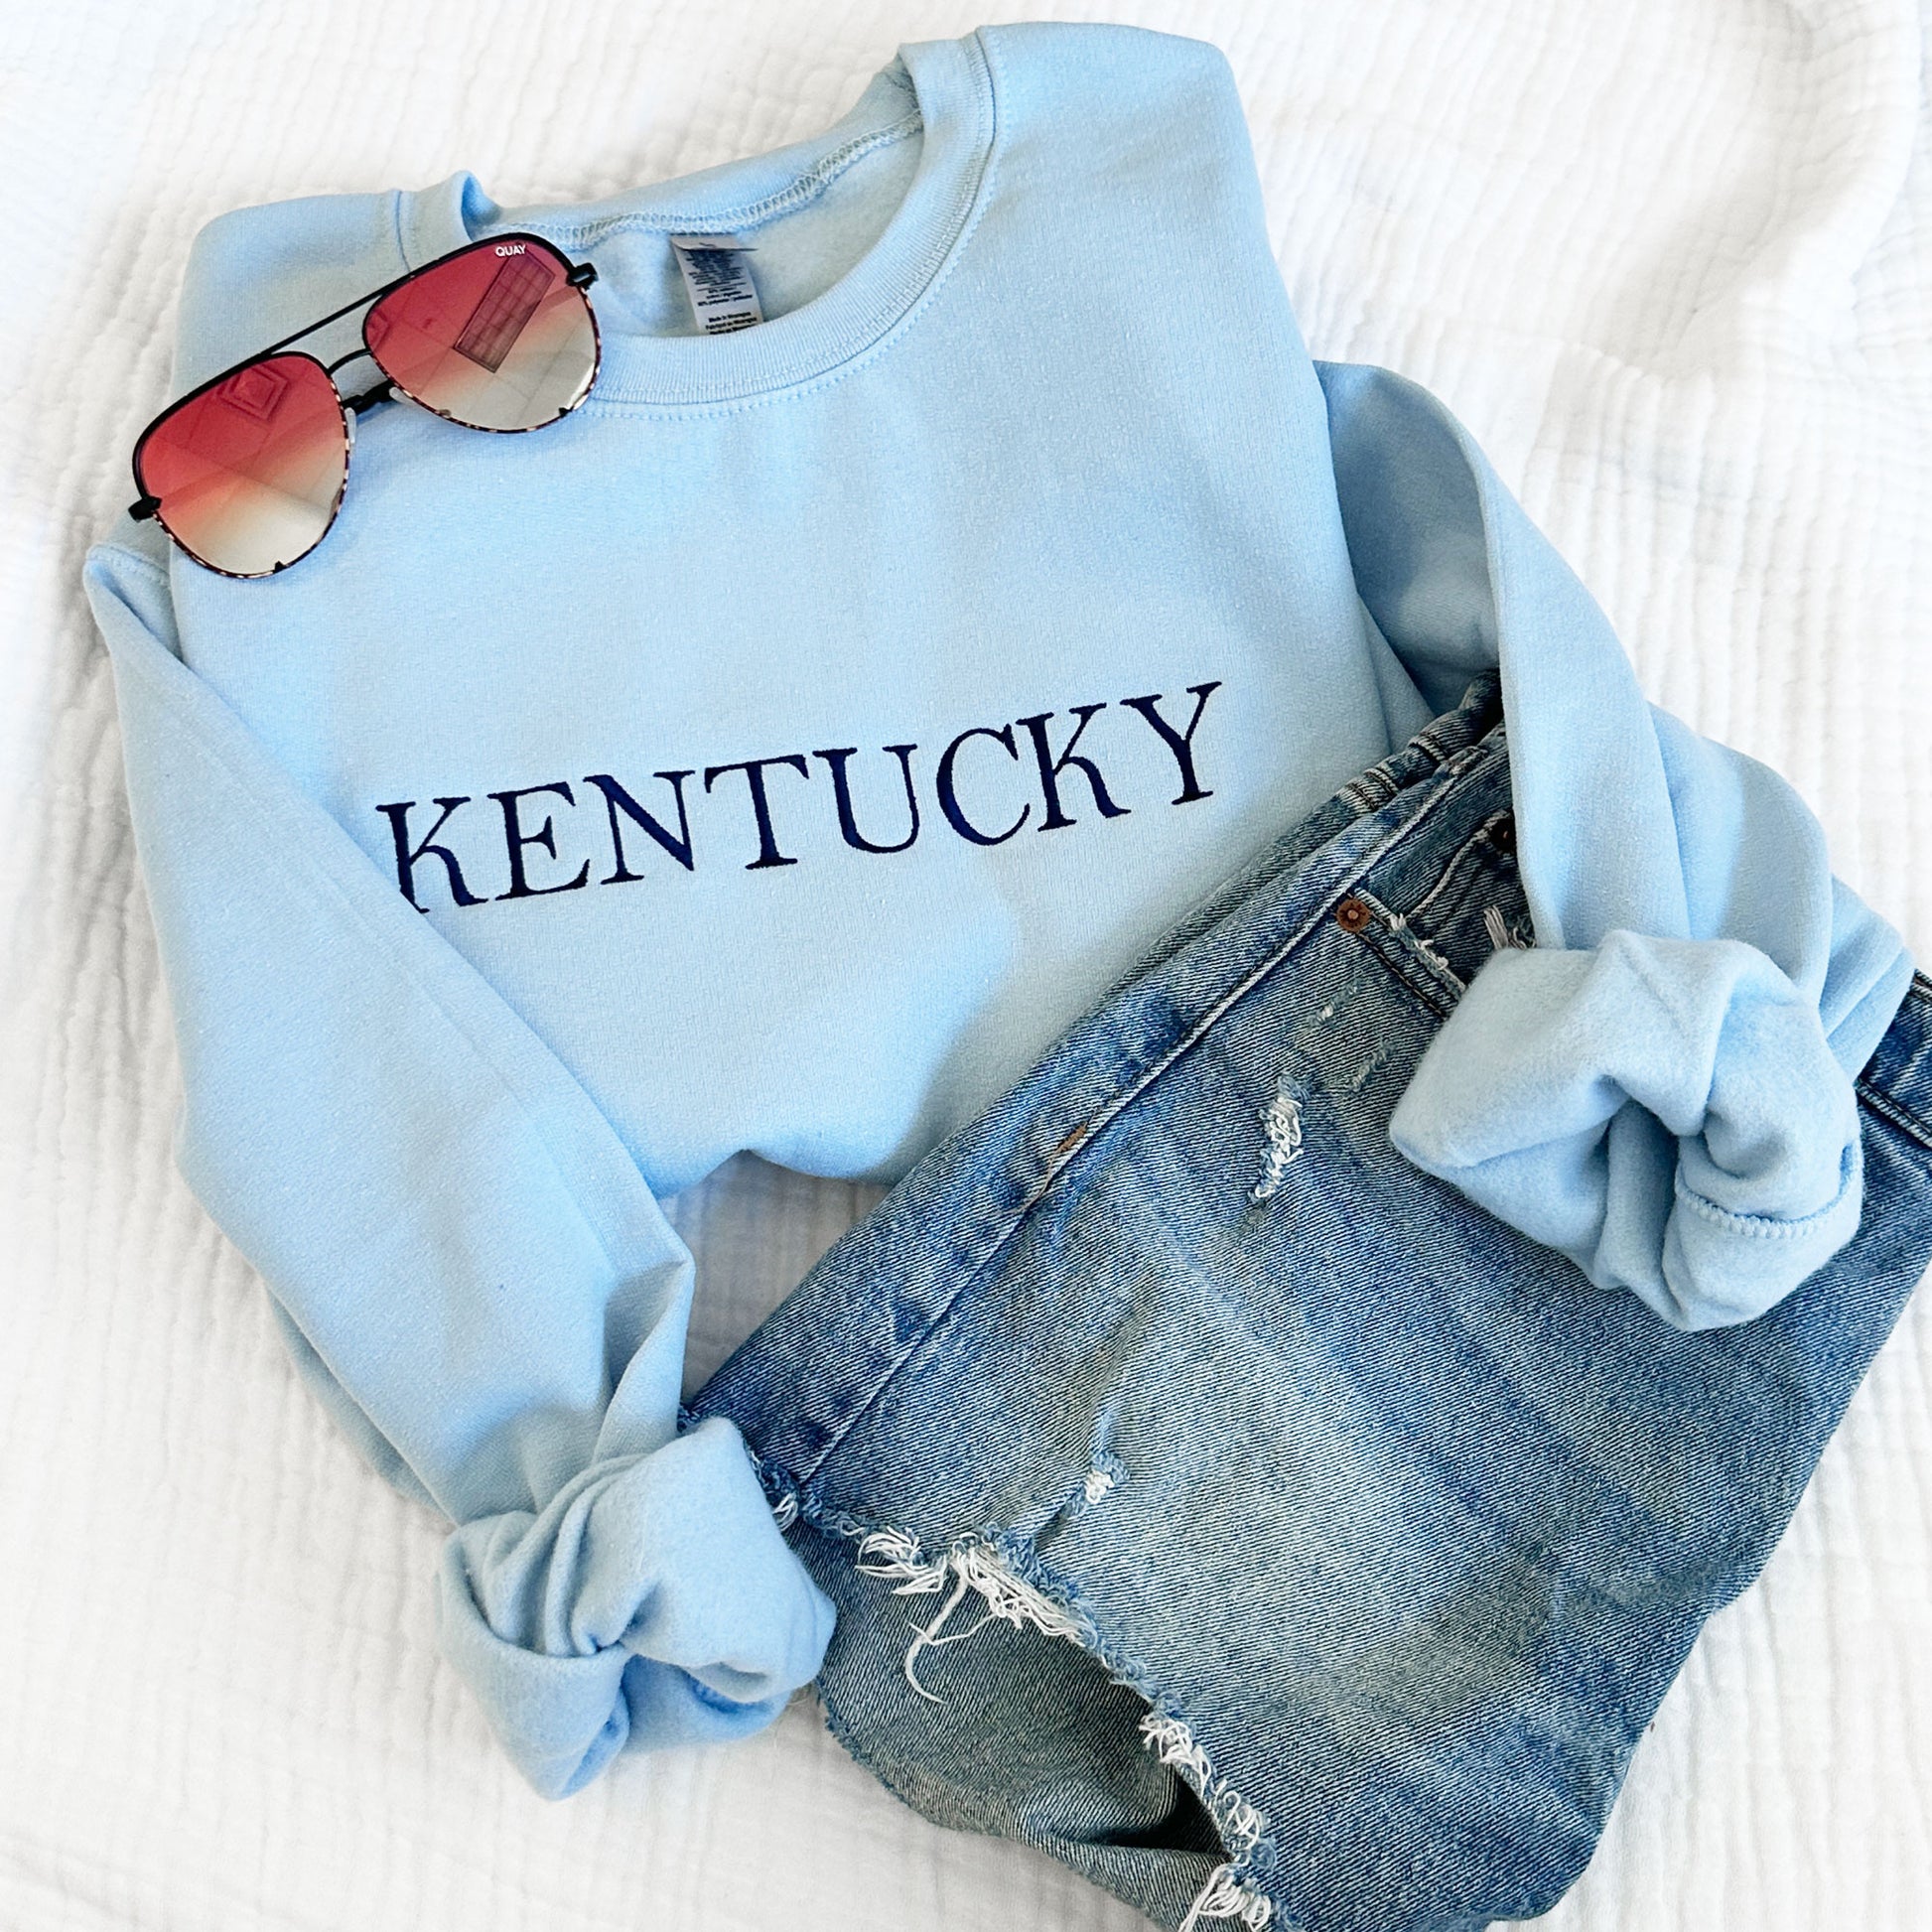 light blue crewneck sweatshirt with embroidered Kentucky in navy thread styled with jeans an sunglasses